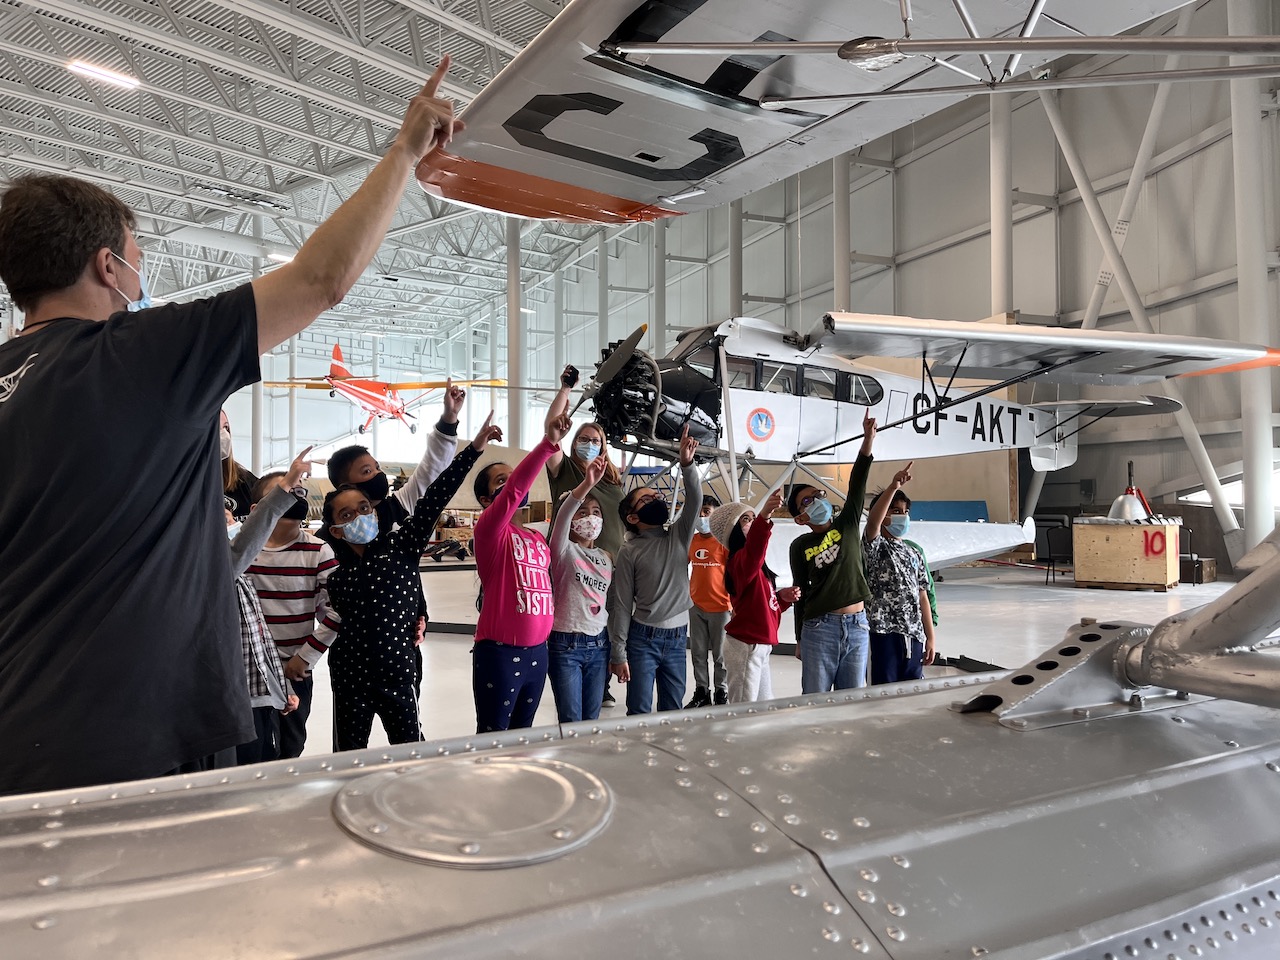 A group of young students receives at tour at the Royal Aviation Museum